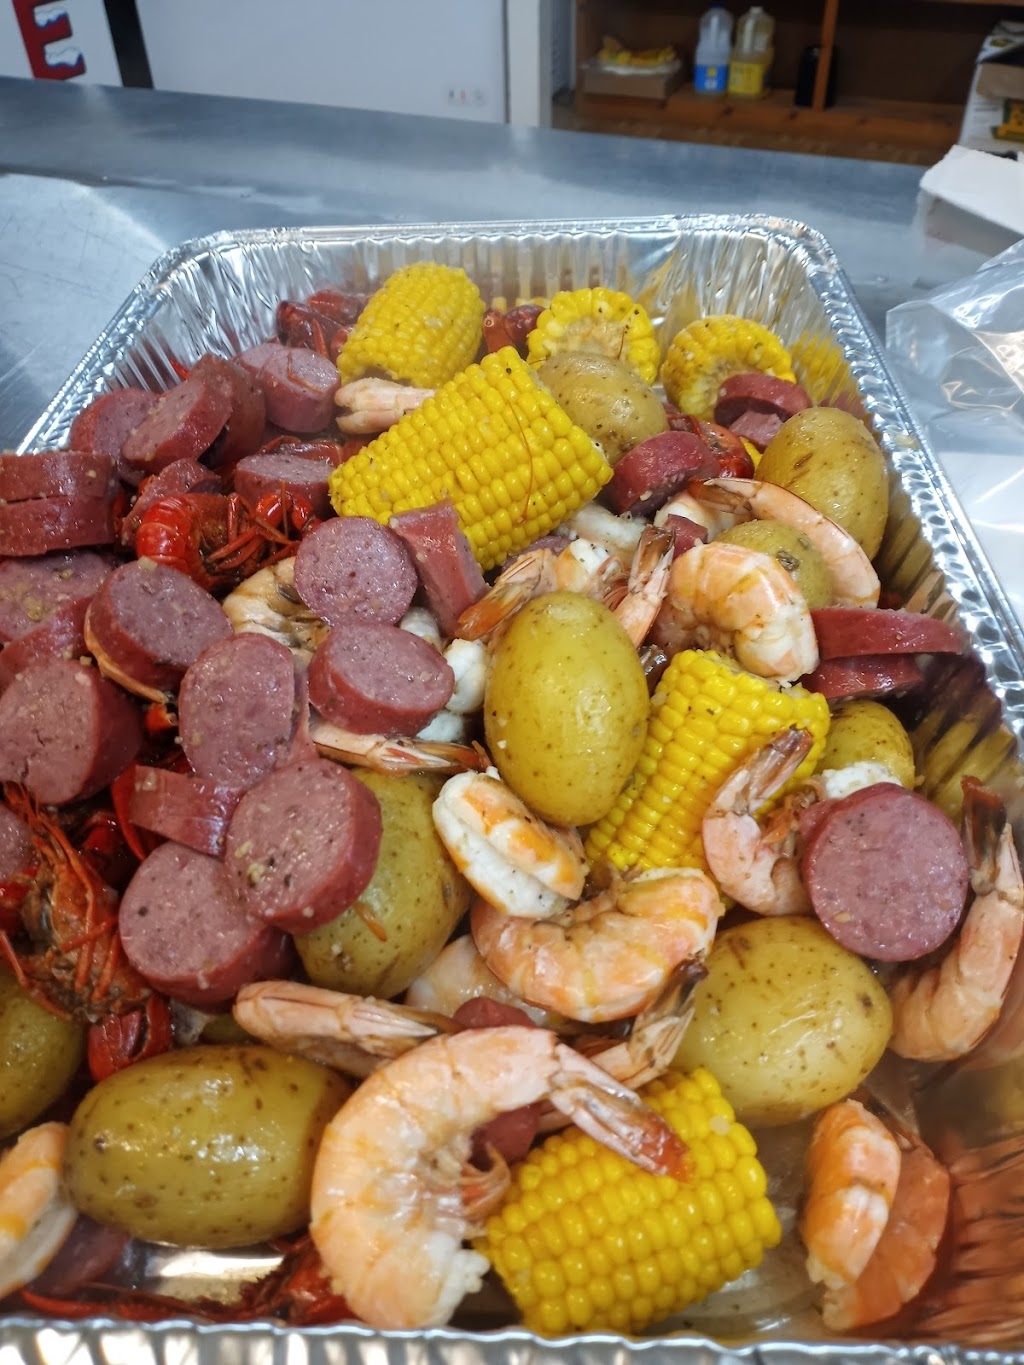 When I Seafood | restaurant | 921 N 2nd St, Clinton, MO 64735, United States | 6603831438 OR +1 660-383-1438